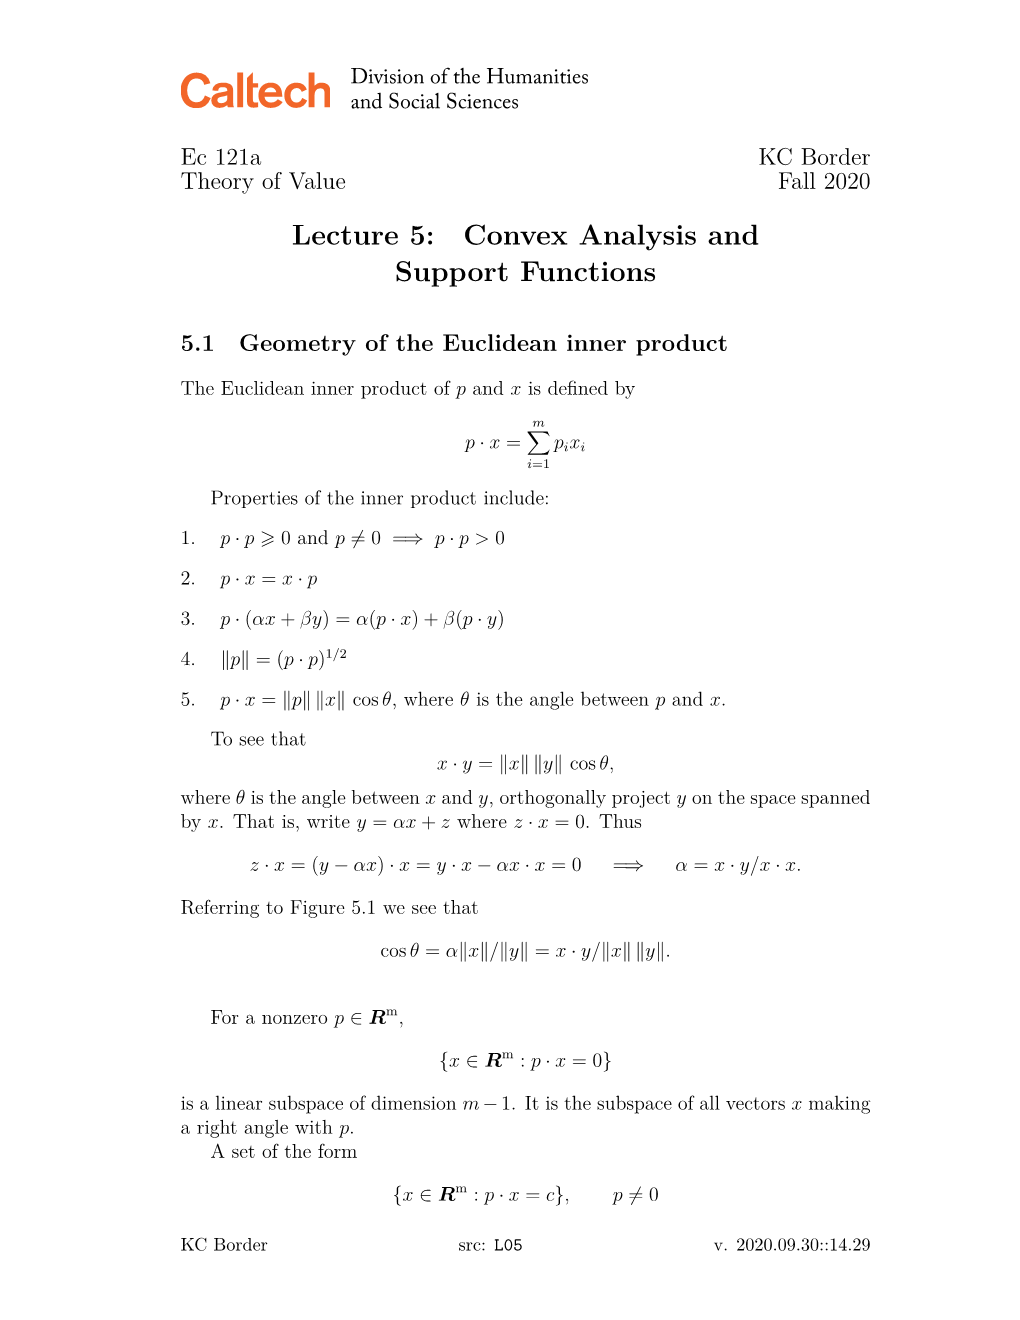 Lecture 5: Convex Analysis and Support Functions